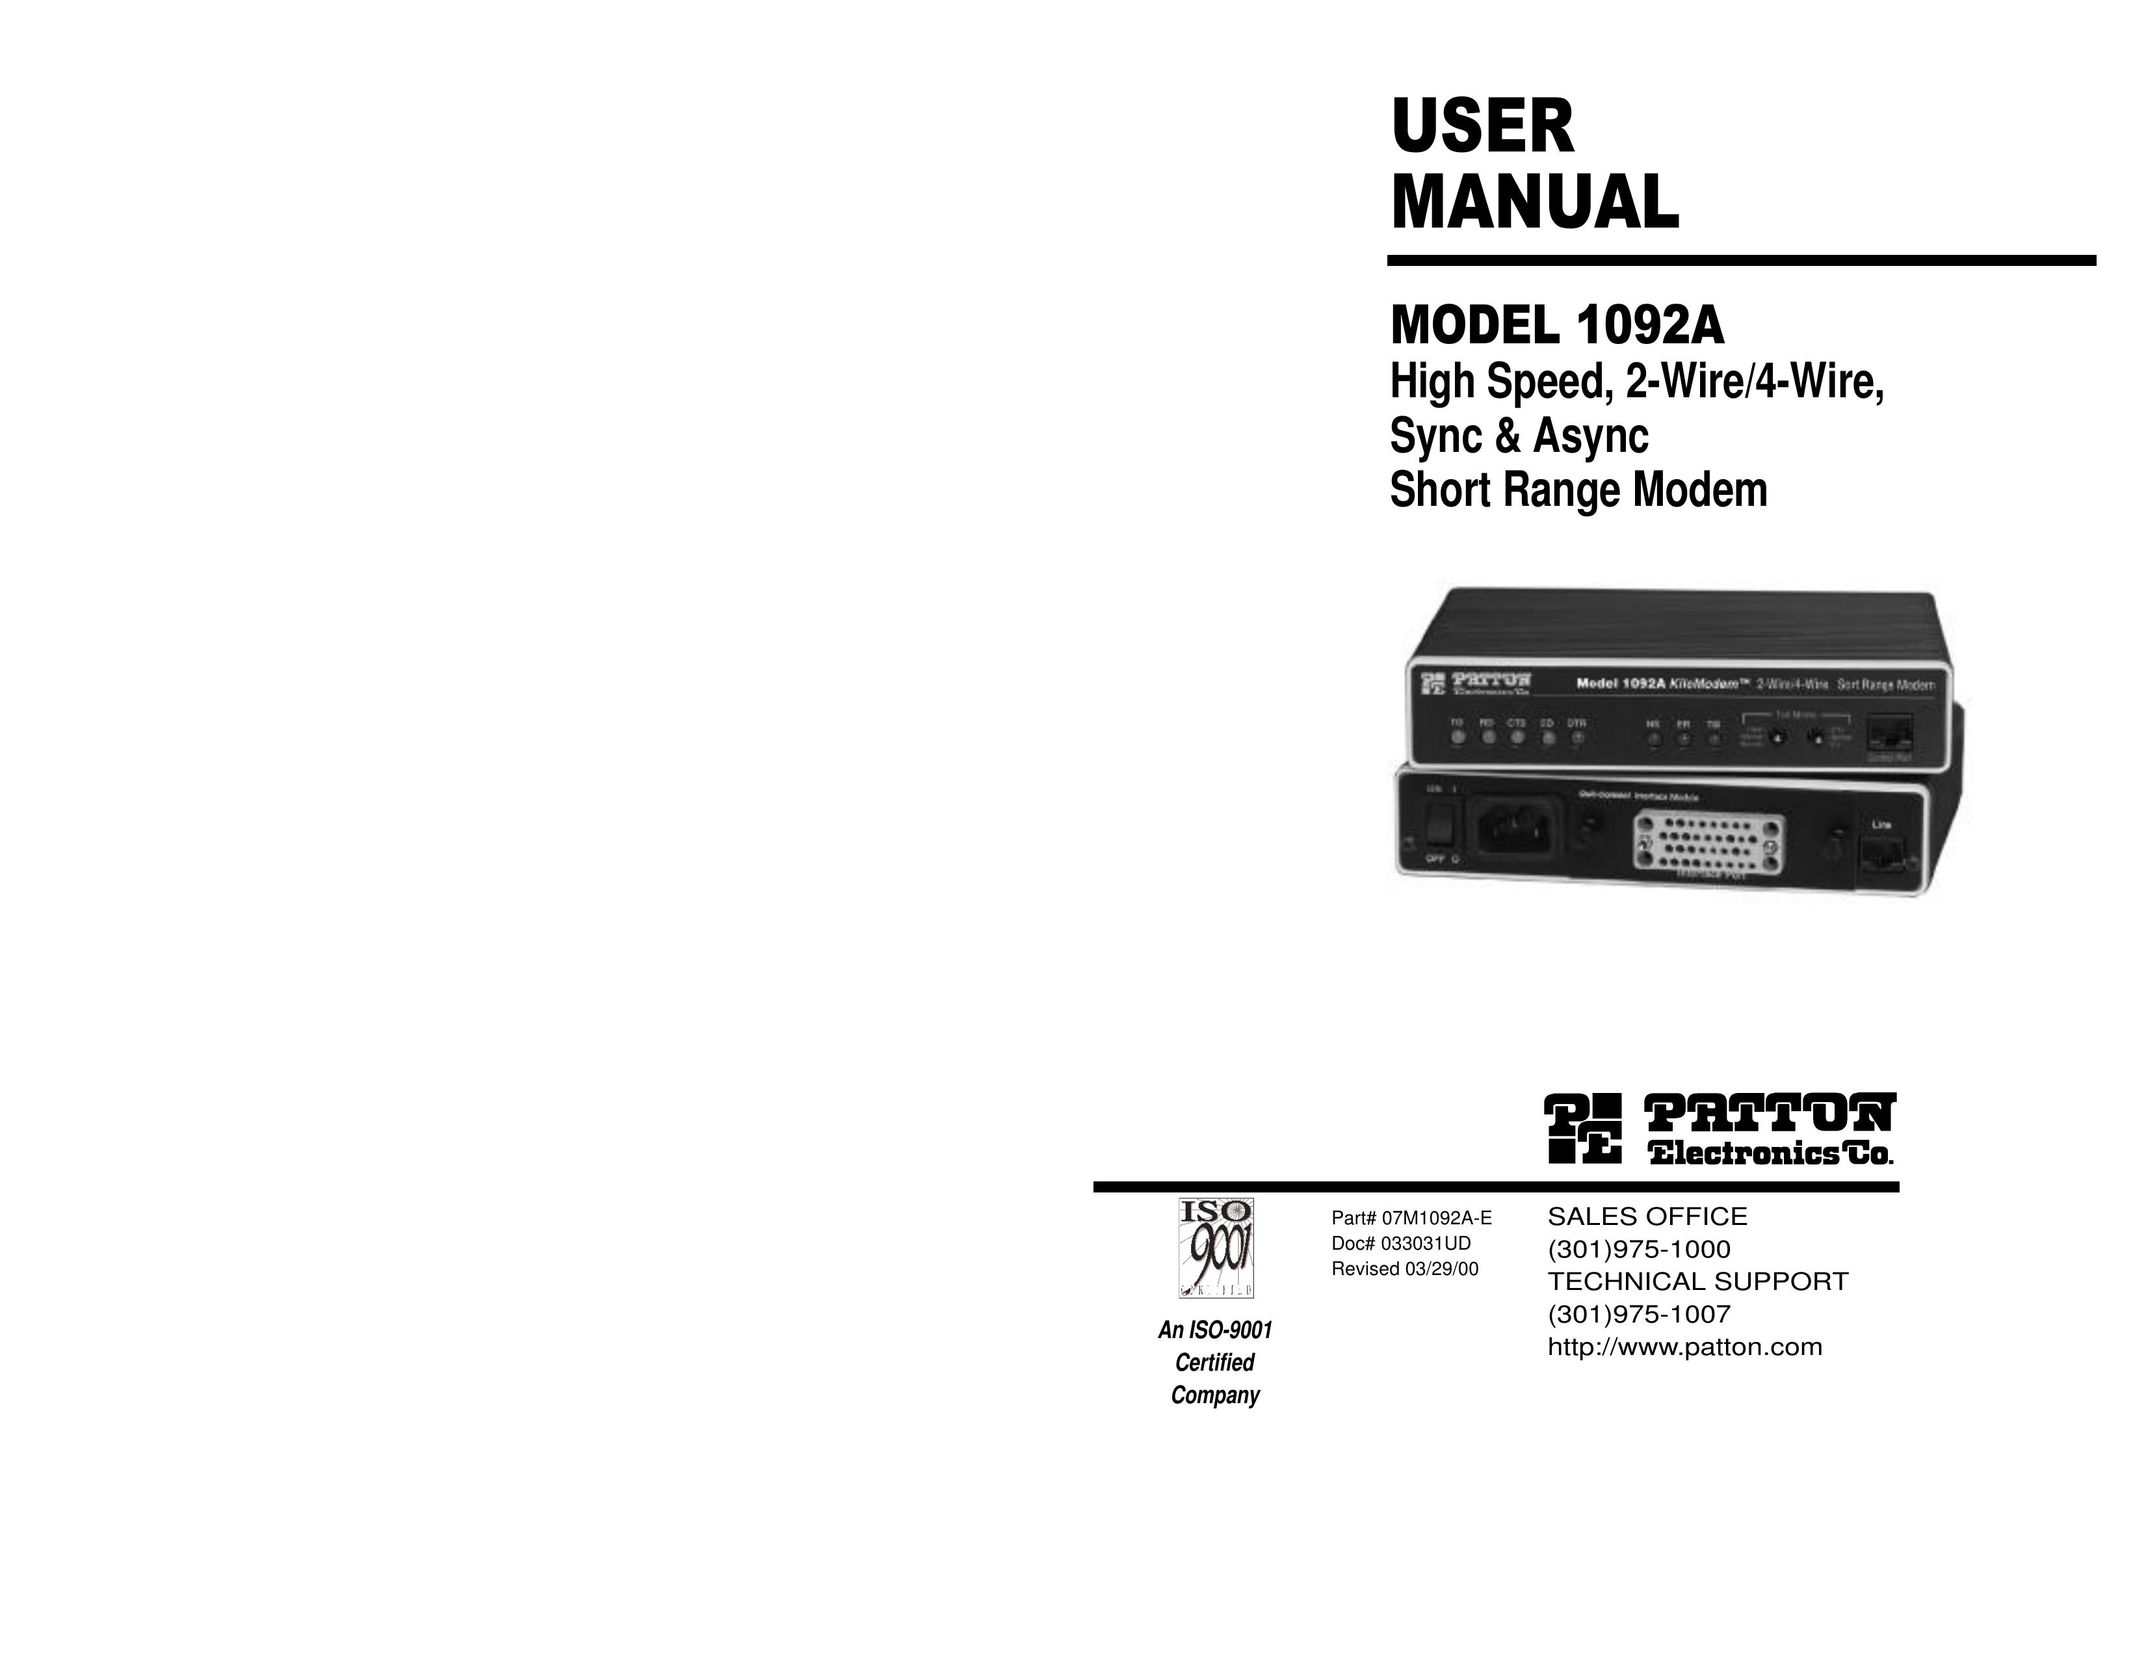 Patton electronic 1092A Network Card User Manual